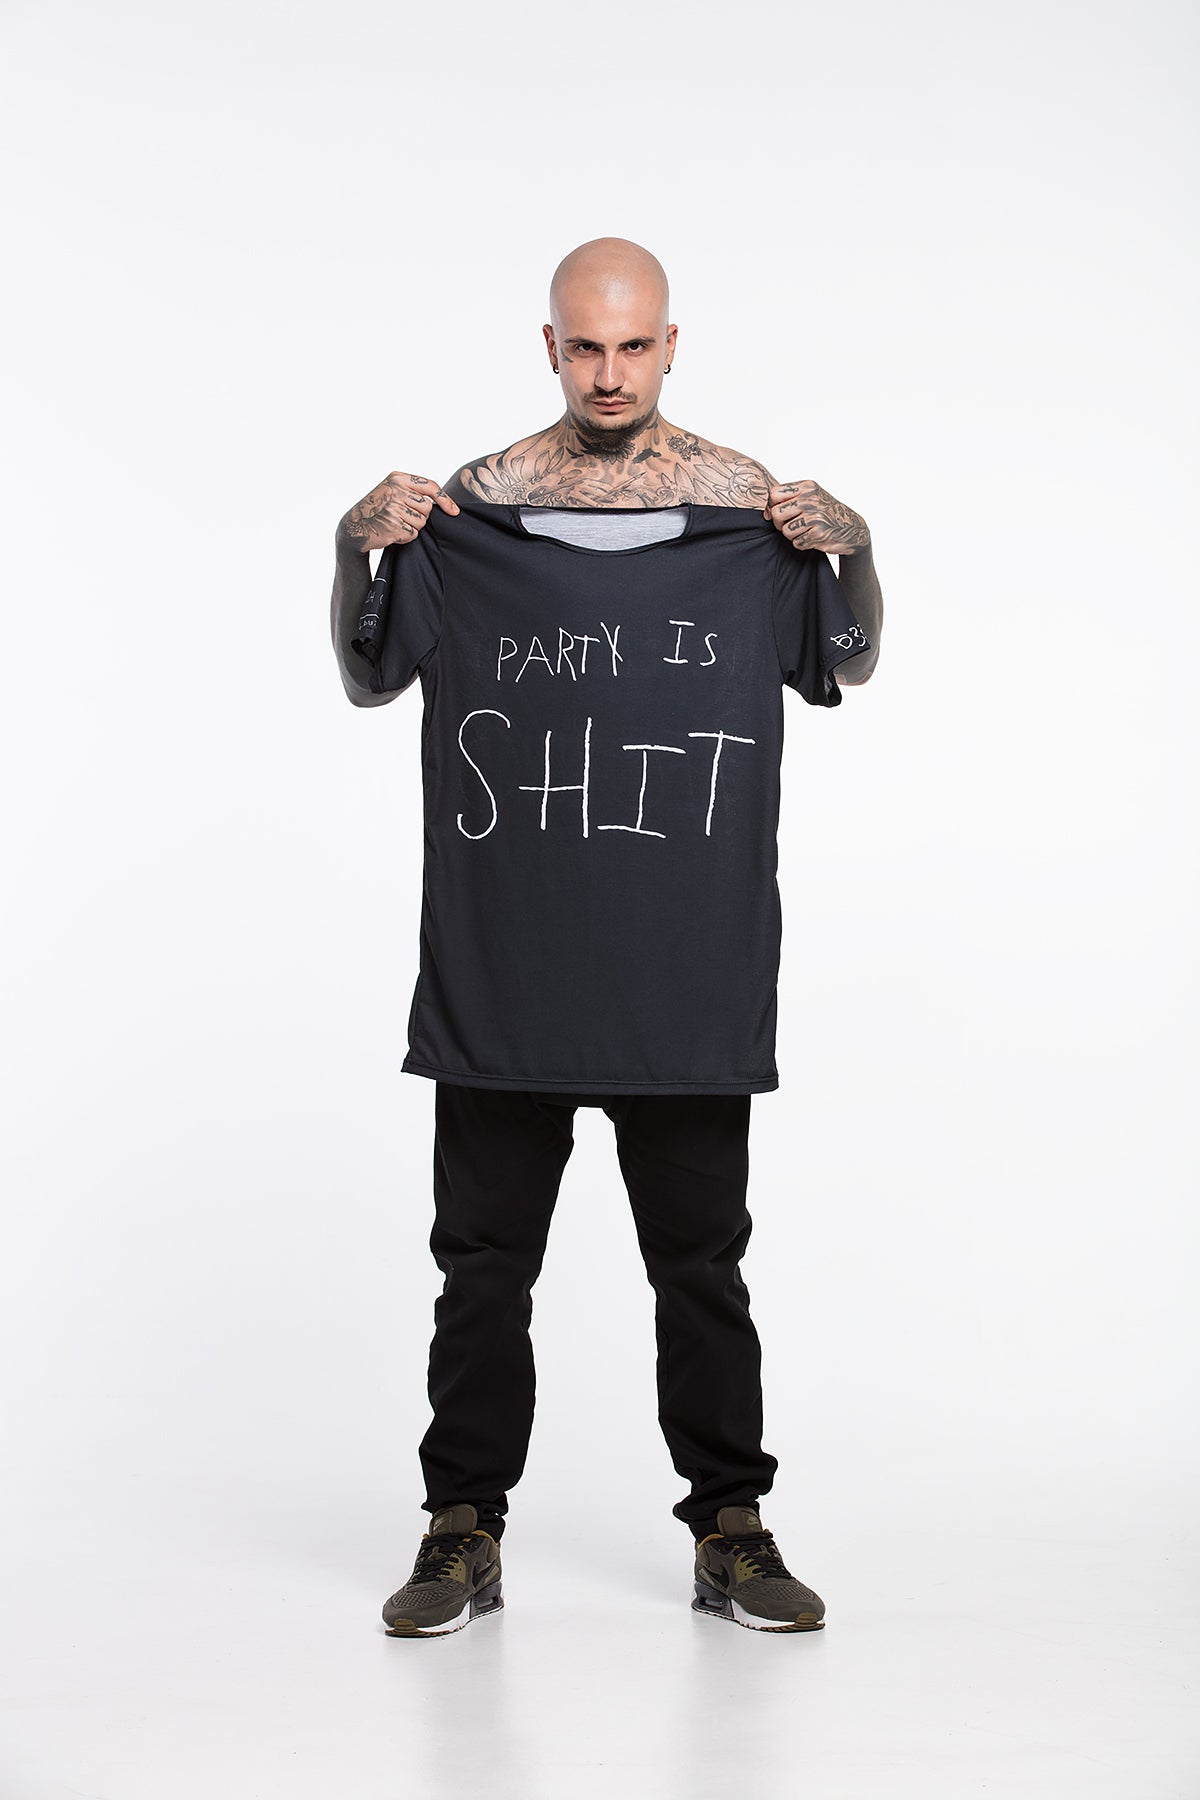 Party is Shit / Without Techno. - oversized T-shirt [Black]